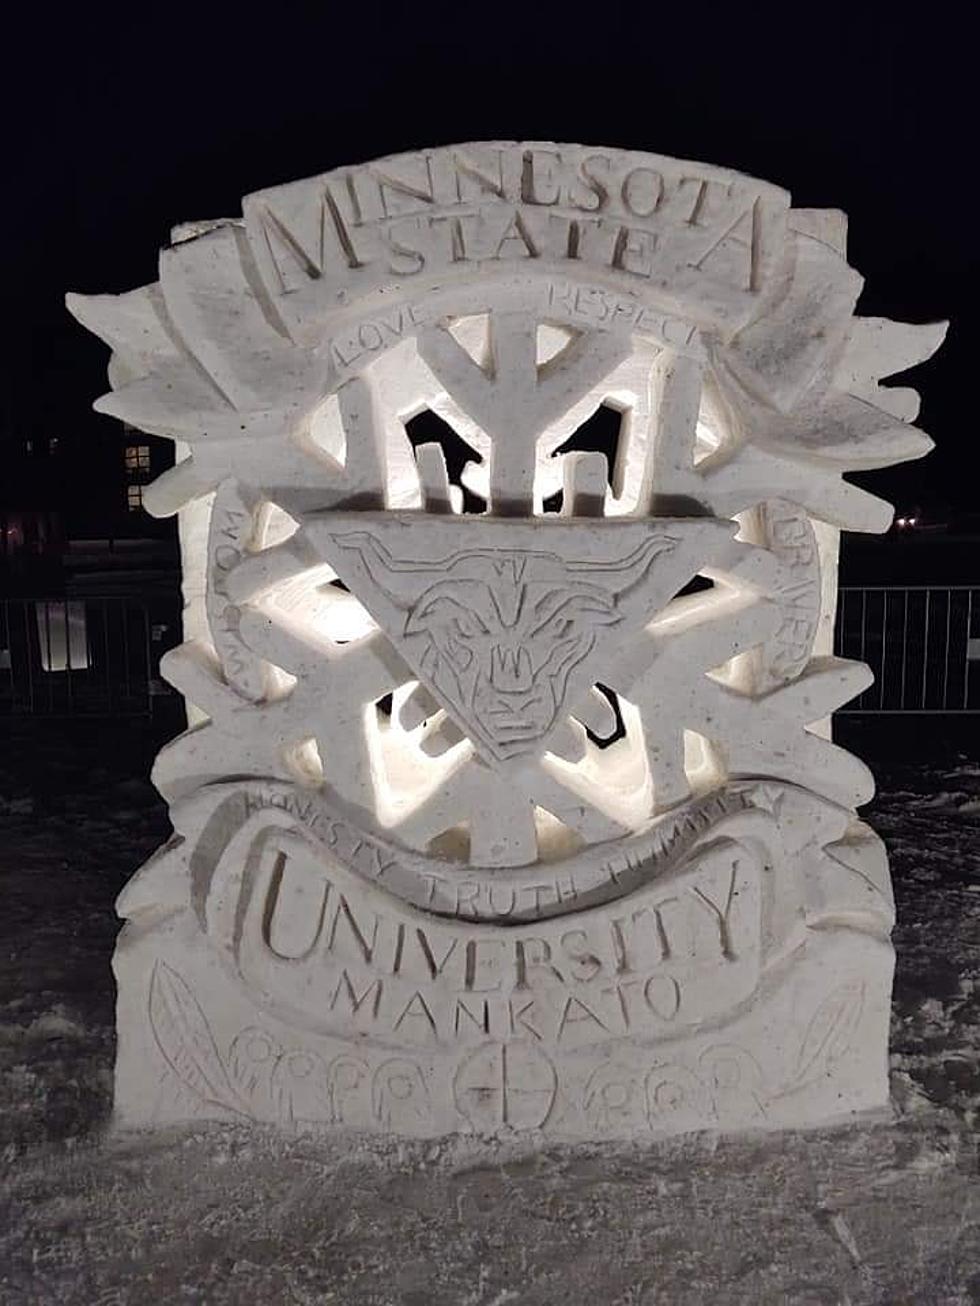 Have You Seen These Incredibly Detailed Minnesota Snow Sculptures?